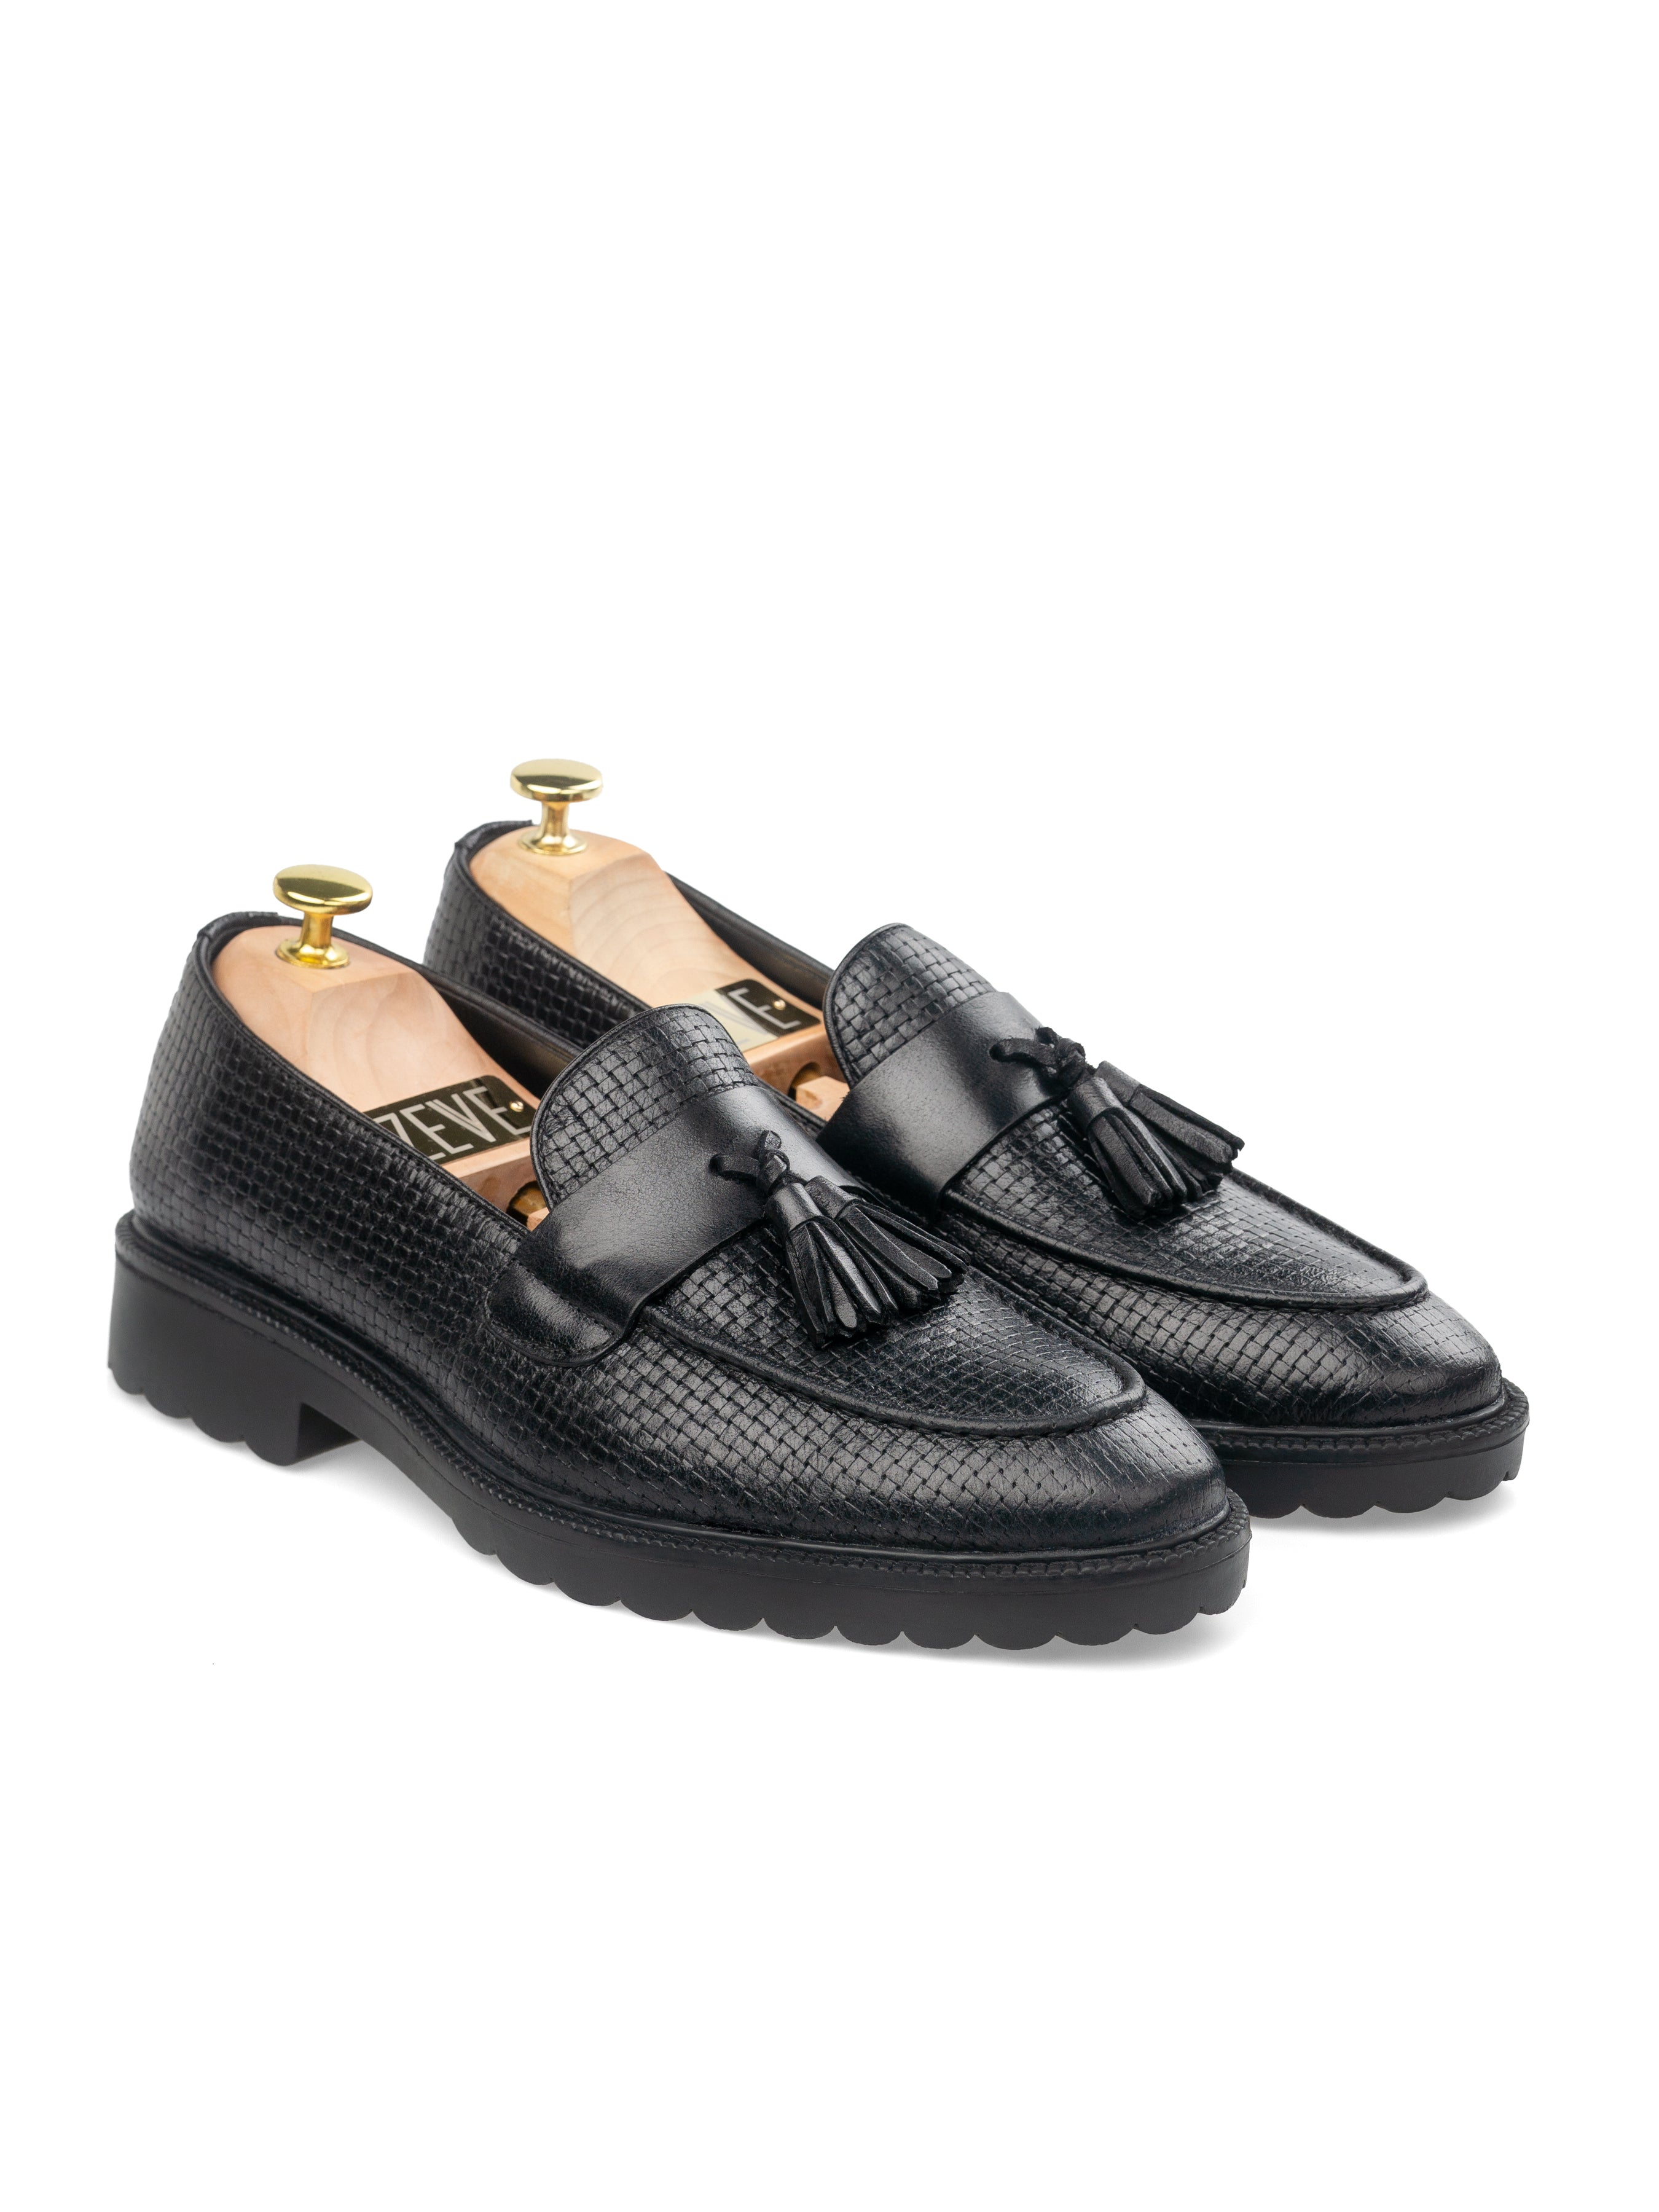 Rocky Tassel Loafer - Black Woven Leather with Solid Strap (Combat Sole)